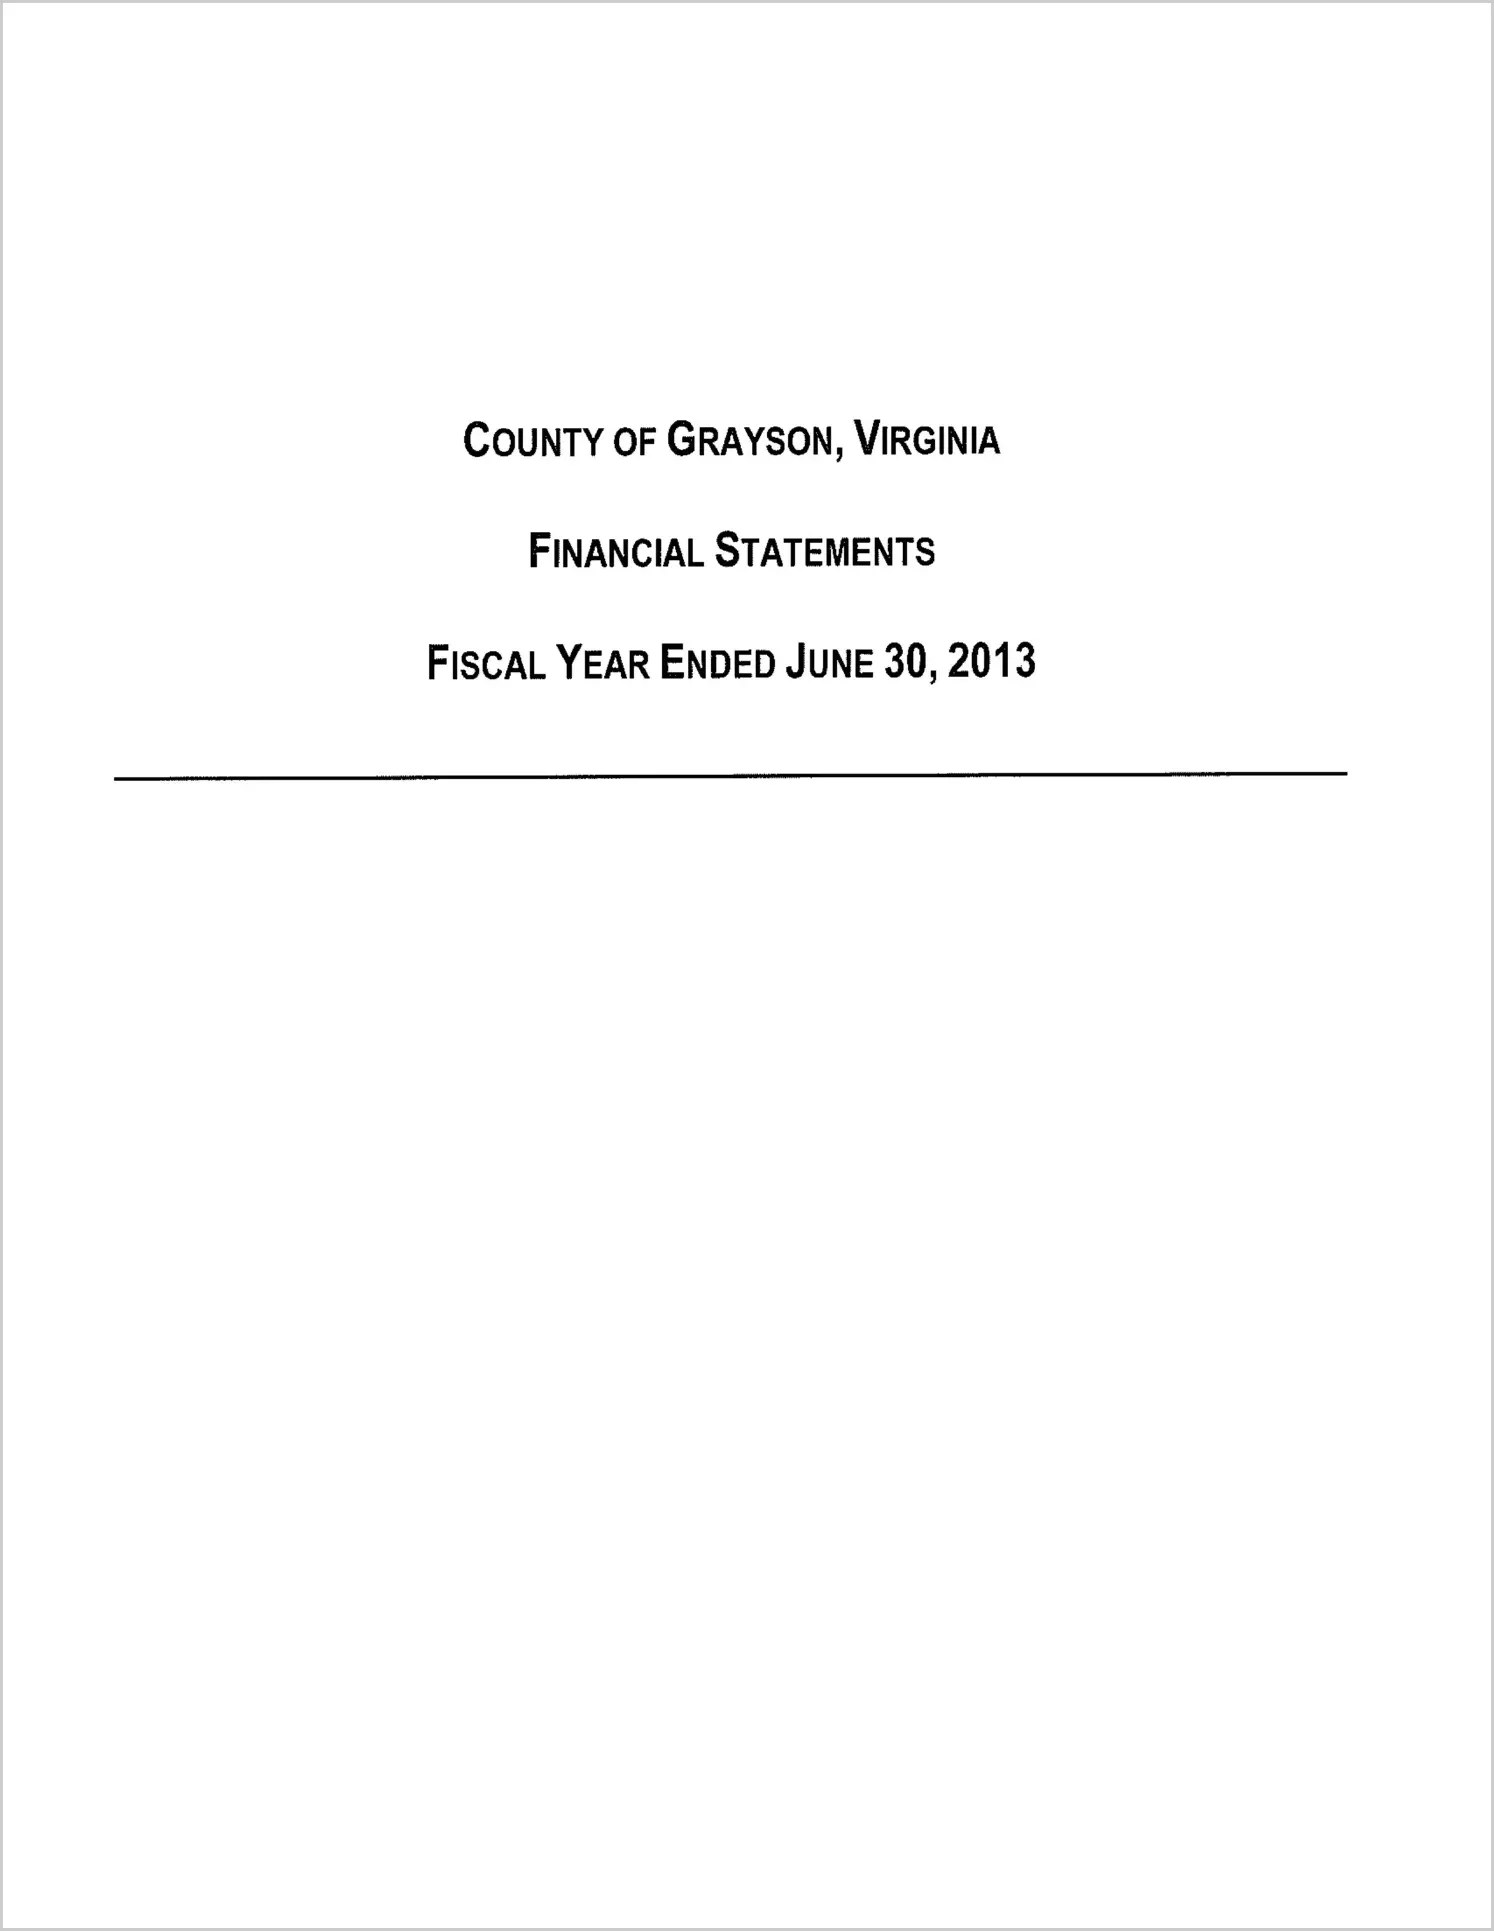 2013 Annual Financial Report for County of Grayson